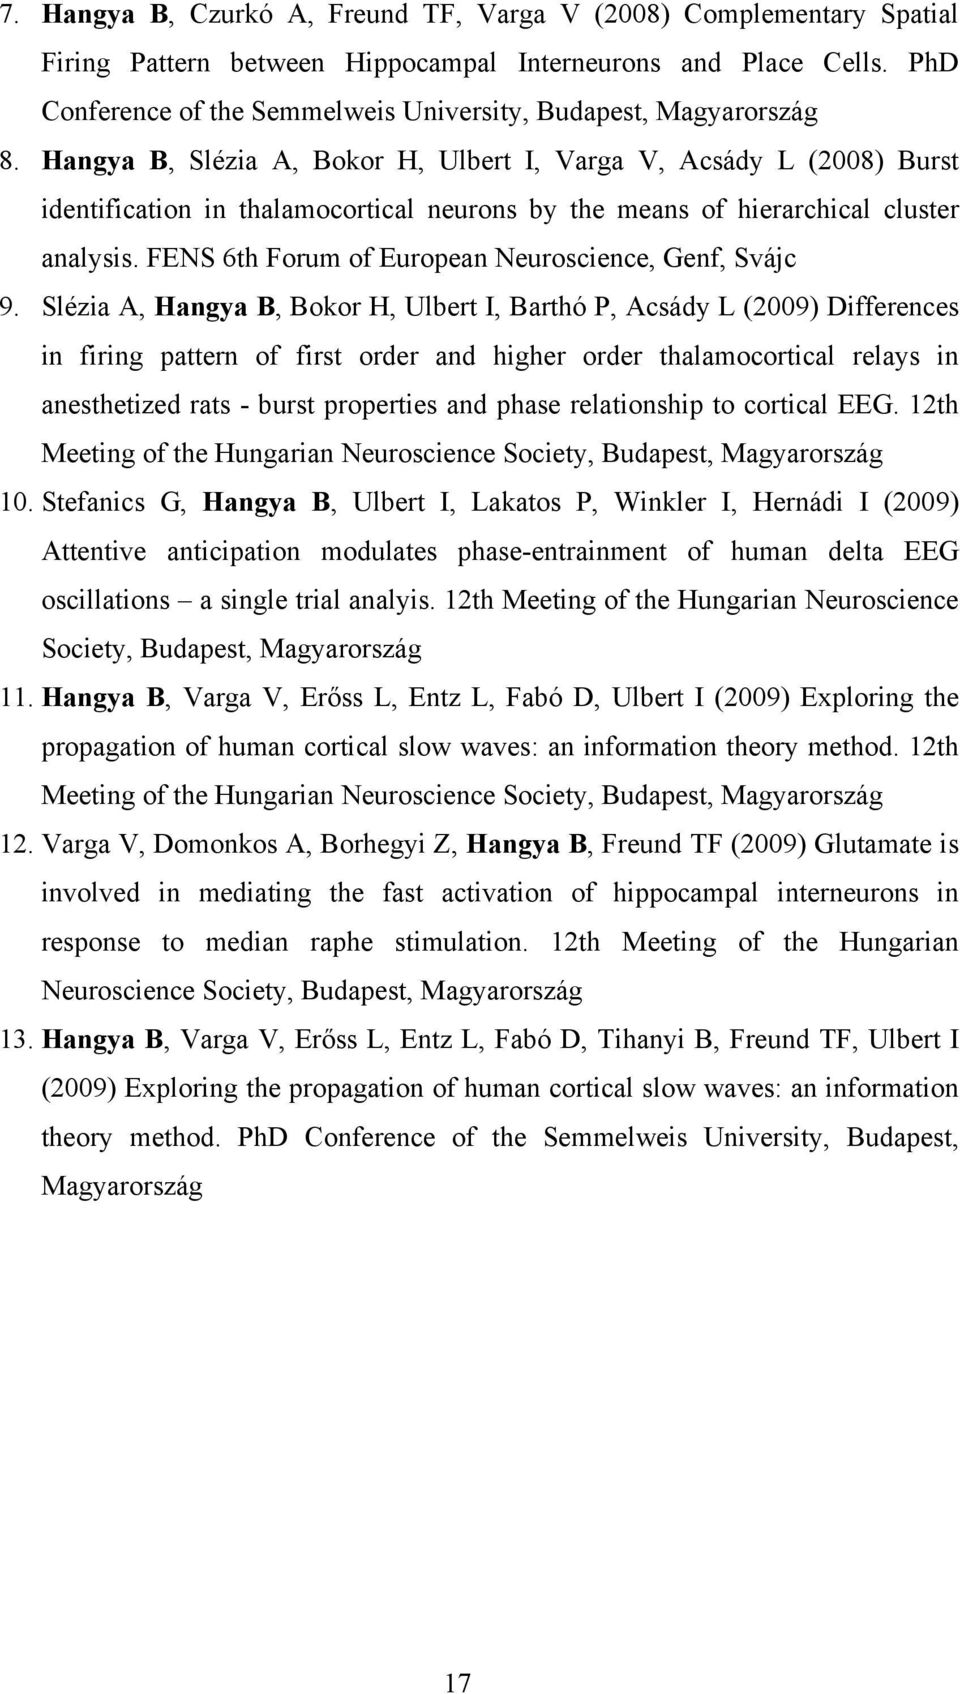 Hangya B, Slézia A, Bokor H, Ulbert I, Varga V, Acsády L (2008) Burst identification in thalamocortical neurons by the means of hierarchical cluster analysis.